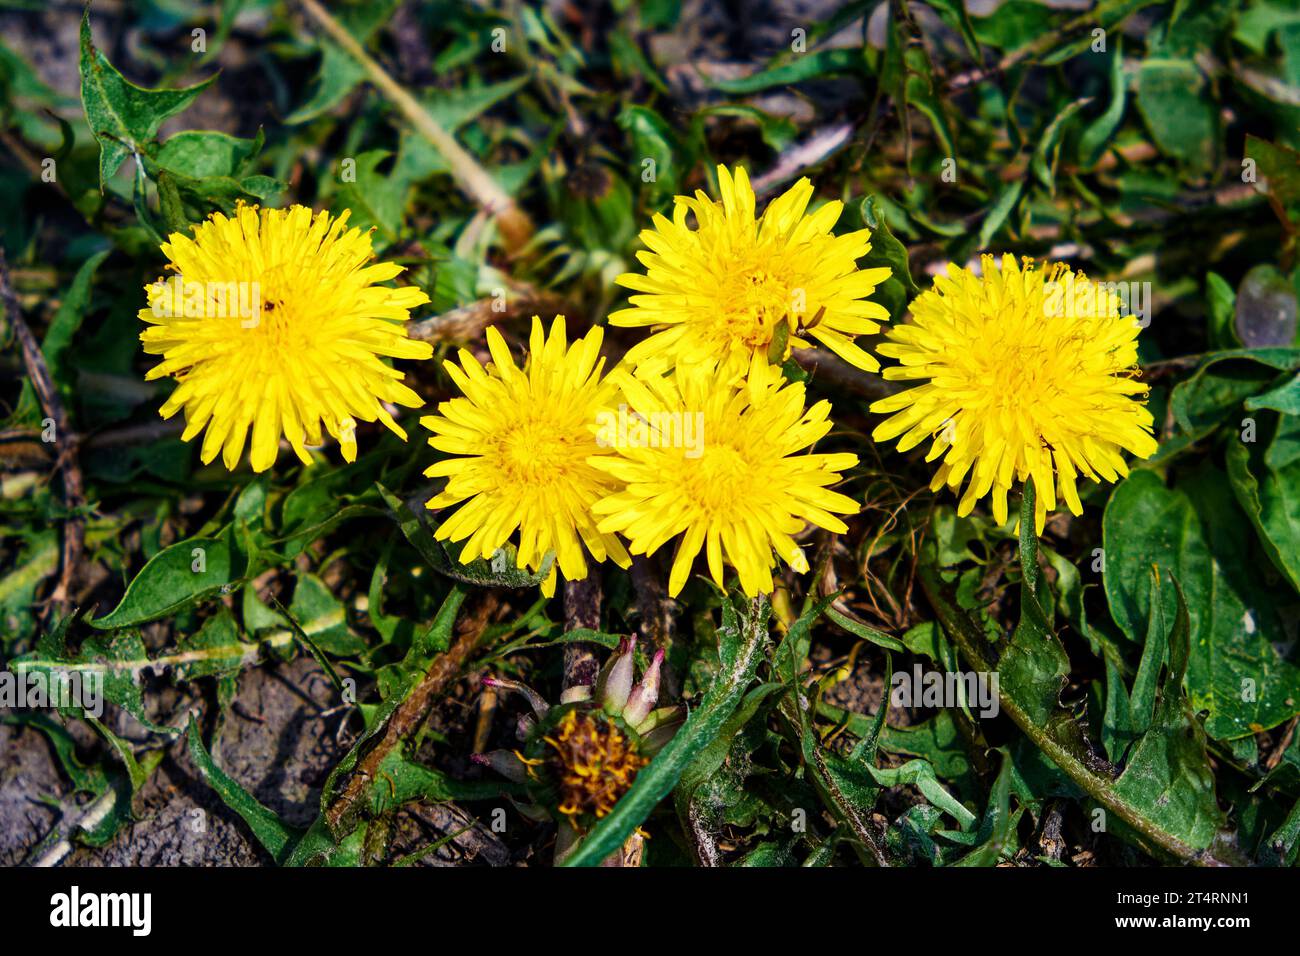 A group of vibrant yellow dandelions, their petals radiating the warmth and joy of spring, standing tall in a lush green field. Several dandelion flow Stock Photo